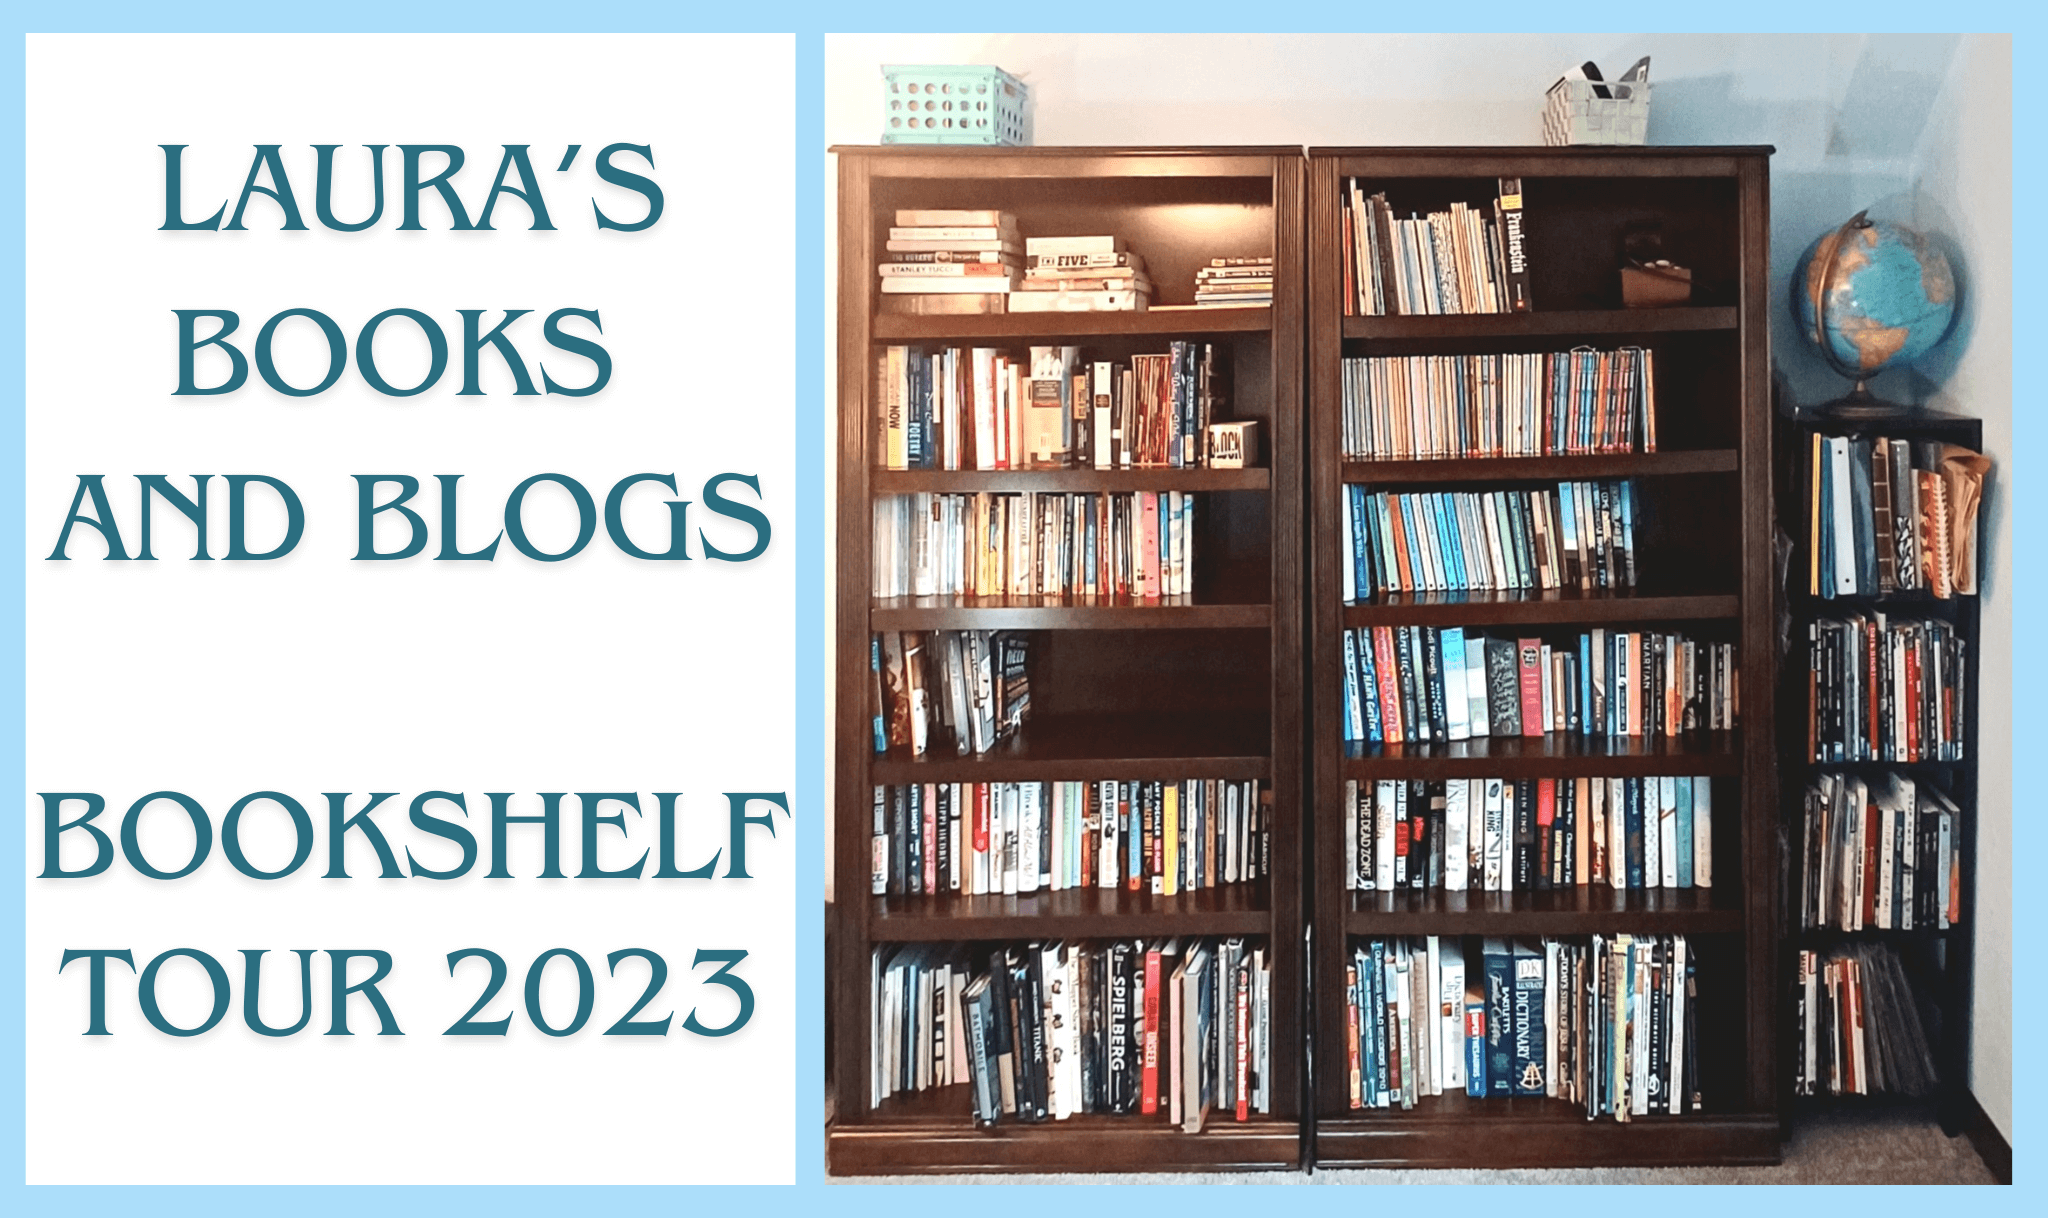 Laura’s Books and Blogs - Bookshelf Tour 2023 - Laura's Books and Blogs